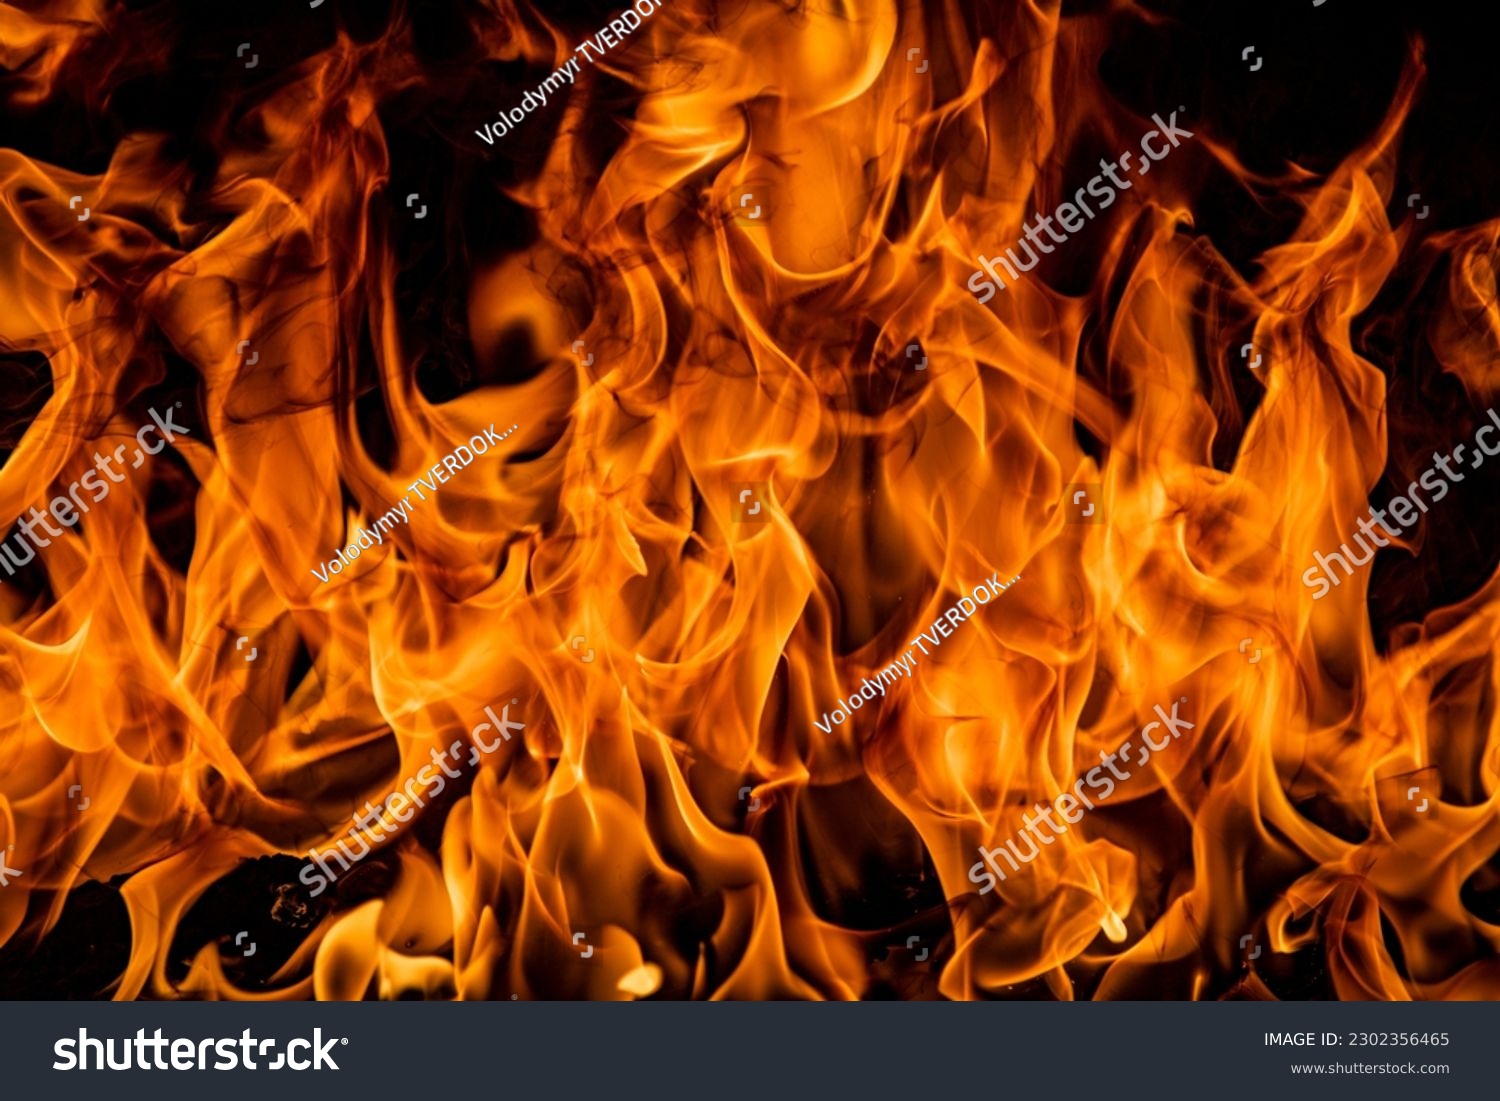 Fire blaze flames on black background. Fire burn flame isolated, abstract texture. Flaming explosion effect with burning fire. #2302356465